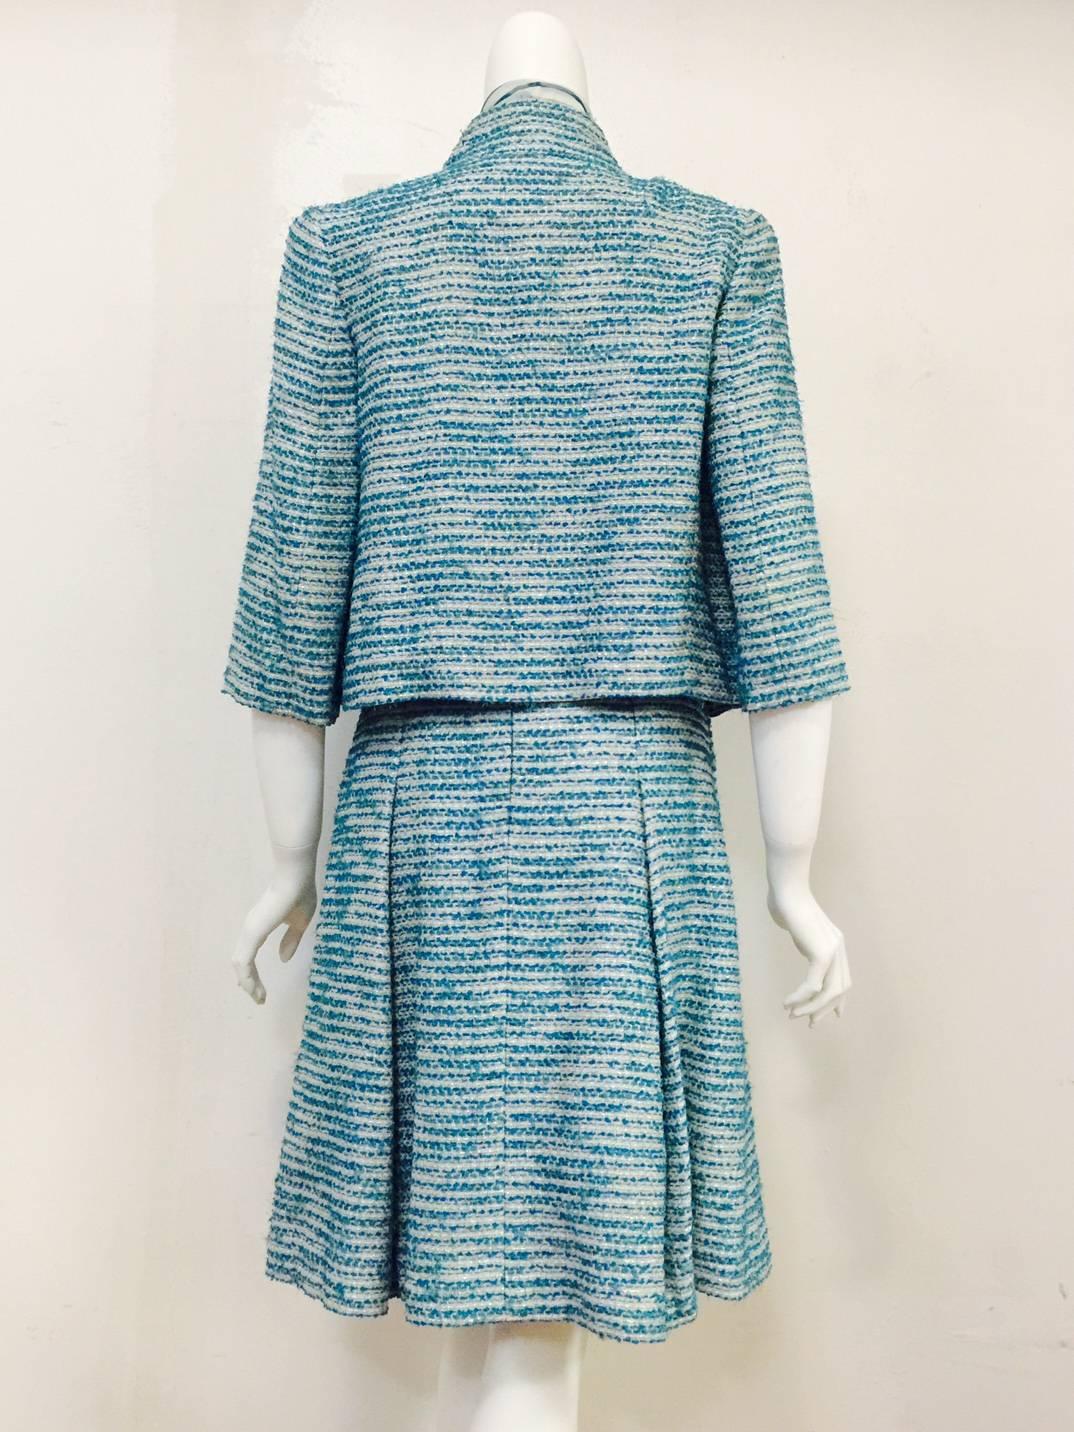 Blue Chanel Spring 2001 Teal and Metallic Silver Tweed 3-Piece Ensemble  